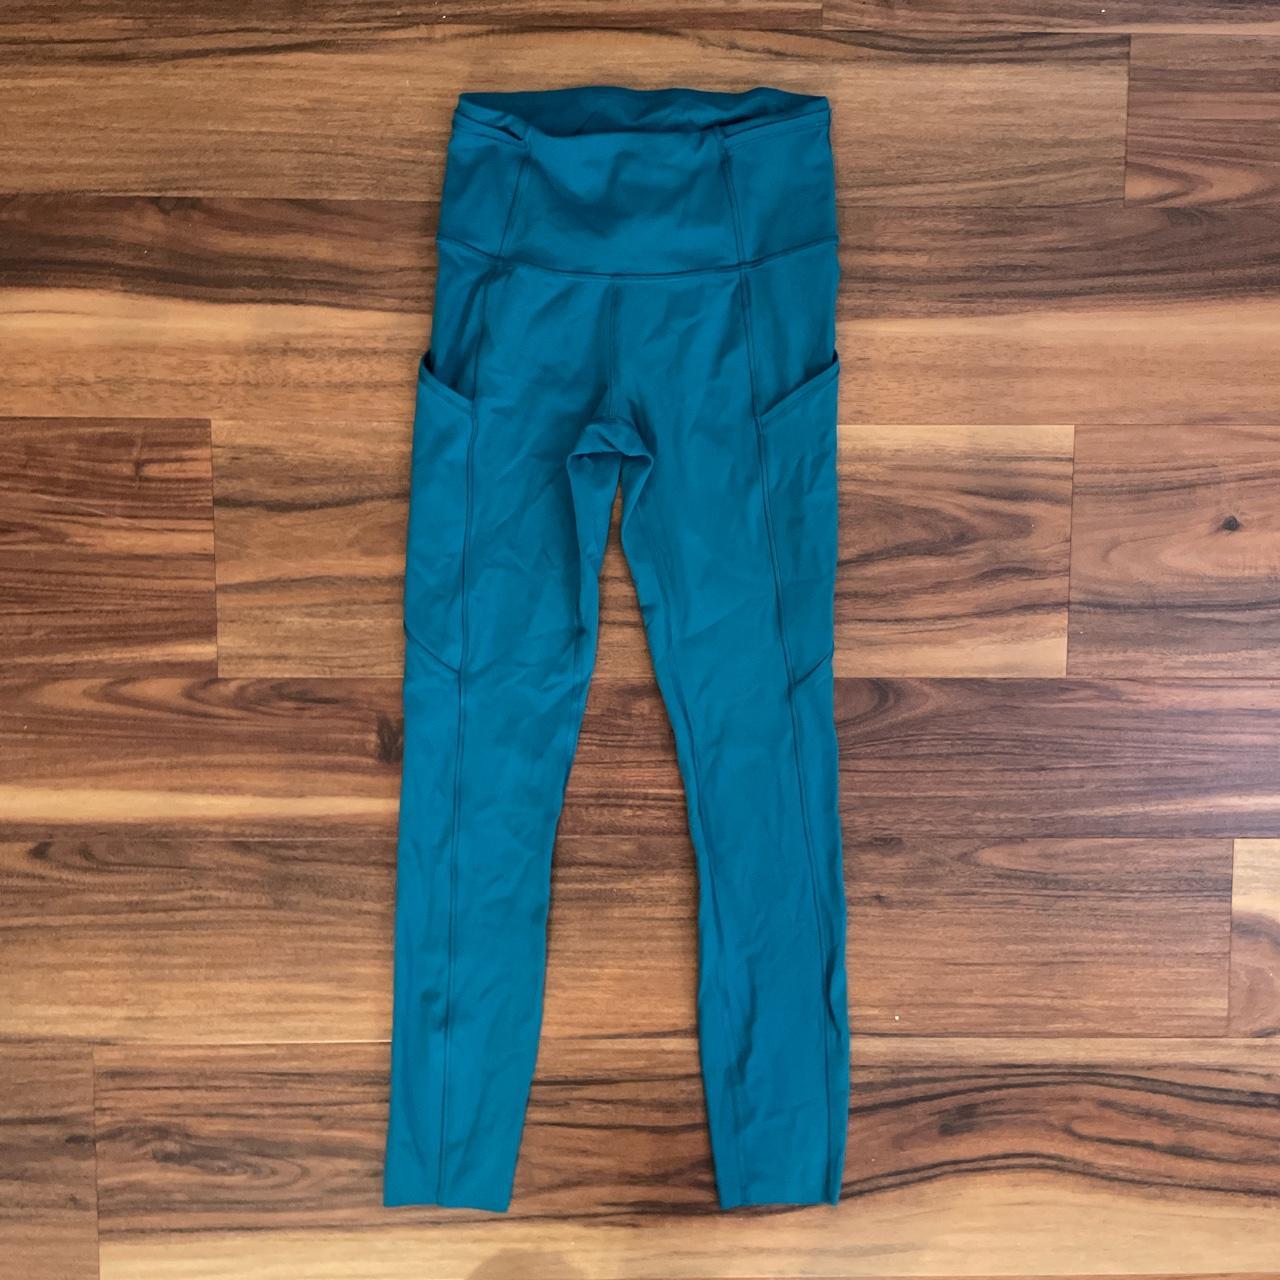 Lululemon cropped storm teal leggings|| marked as a